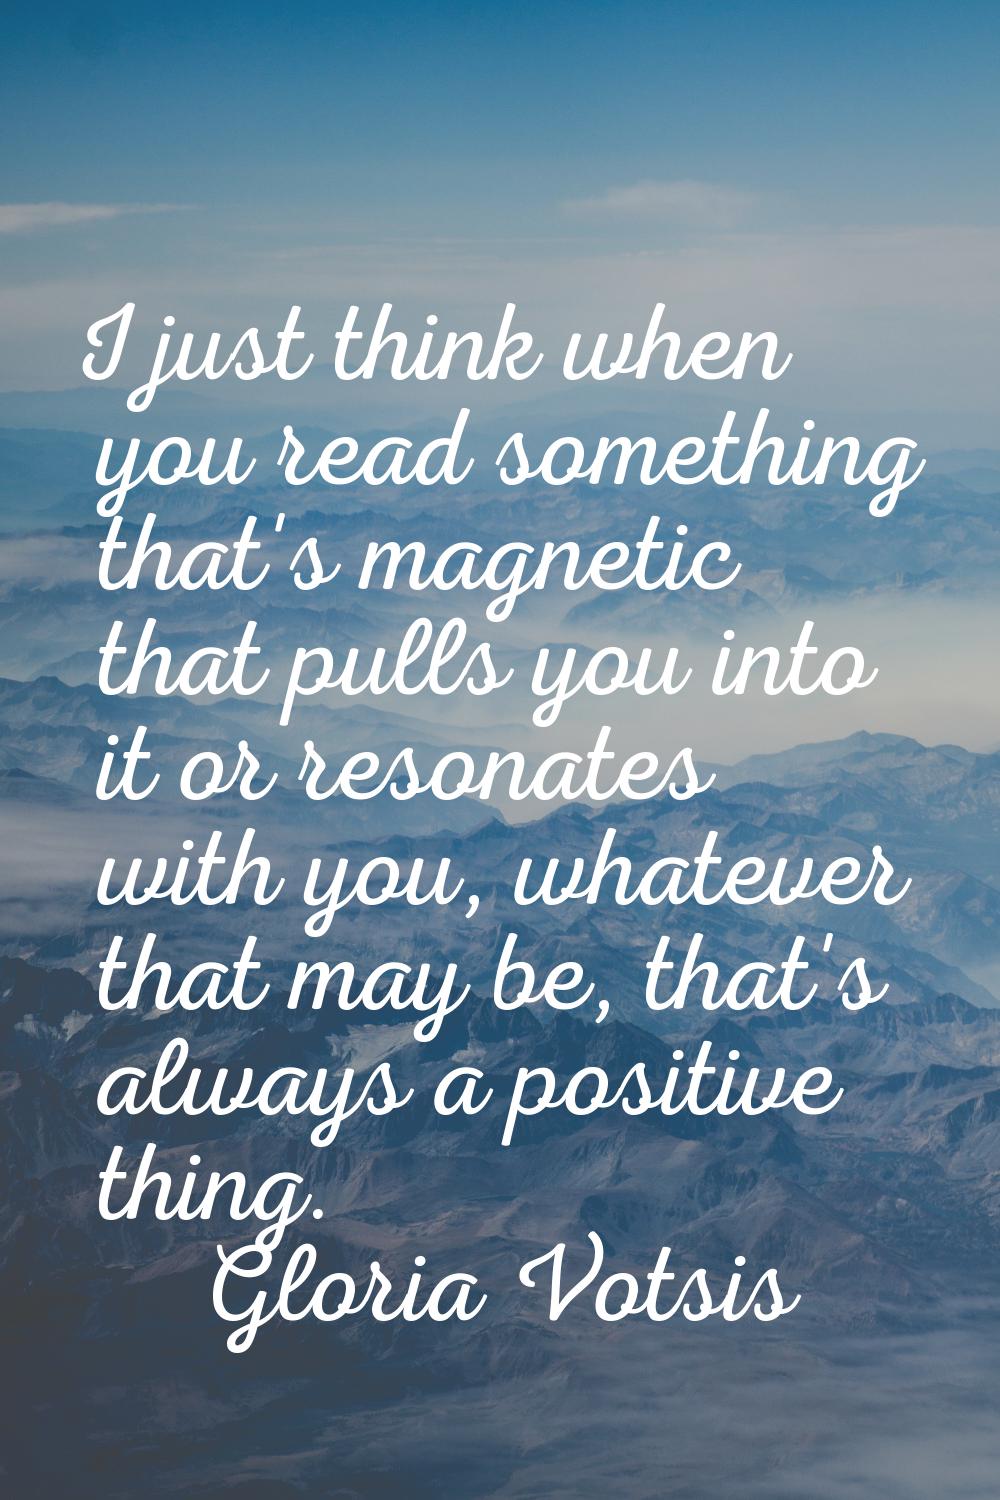 I just think when you read something that's magnetic that pulls you into it or resonates with you, 